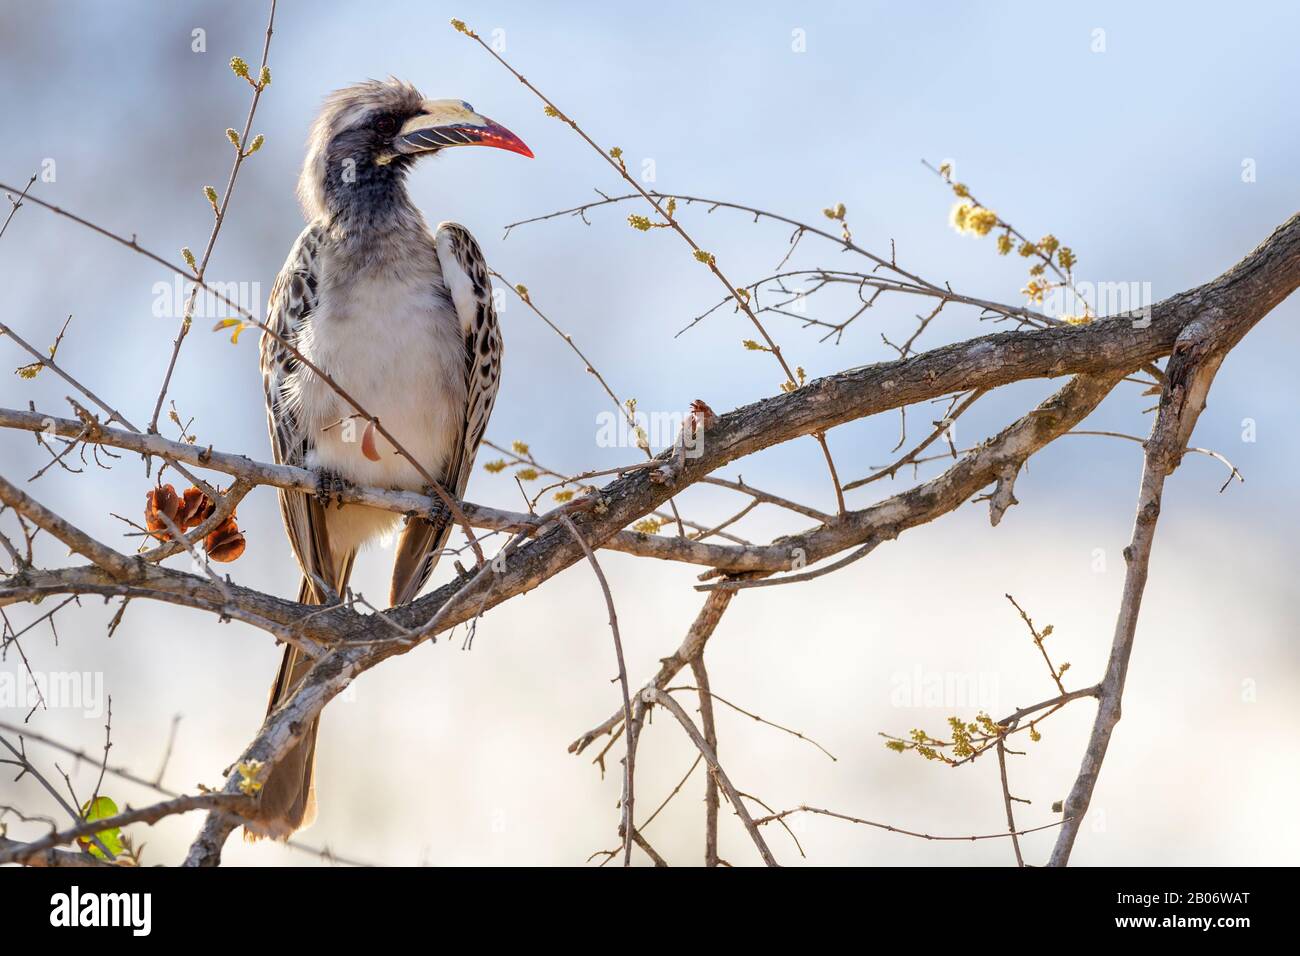 African grey hornbill (Tockus nasutus) perched in acacia tree, Kruger national park, South Africa. Stock Photo